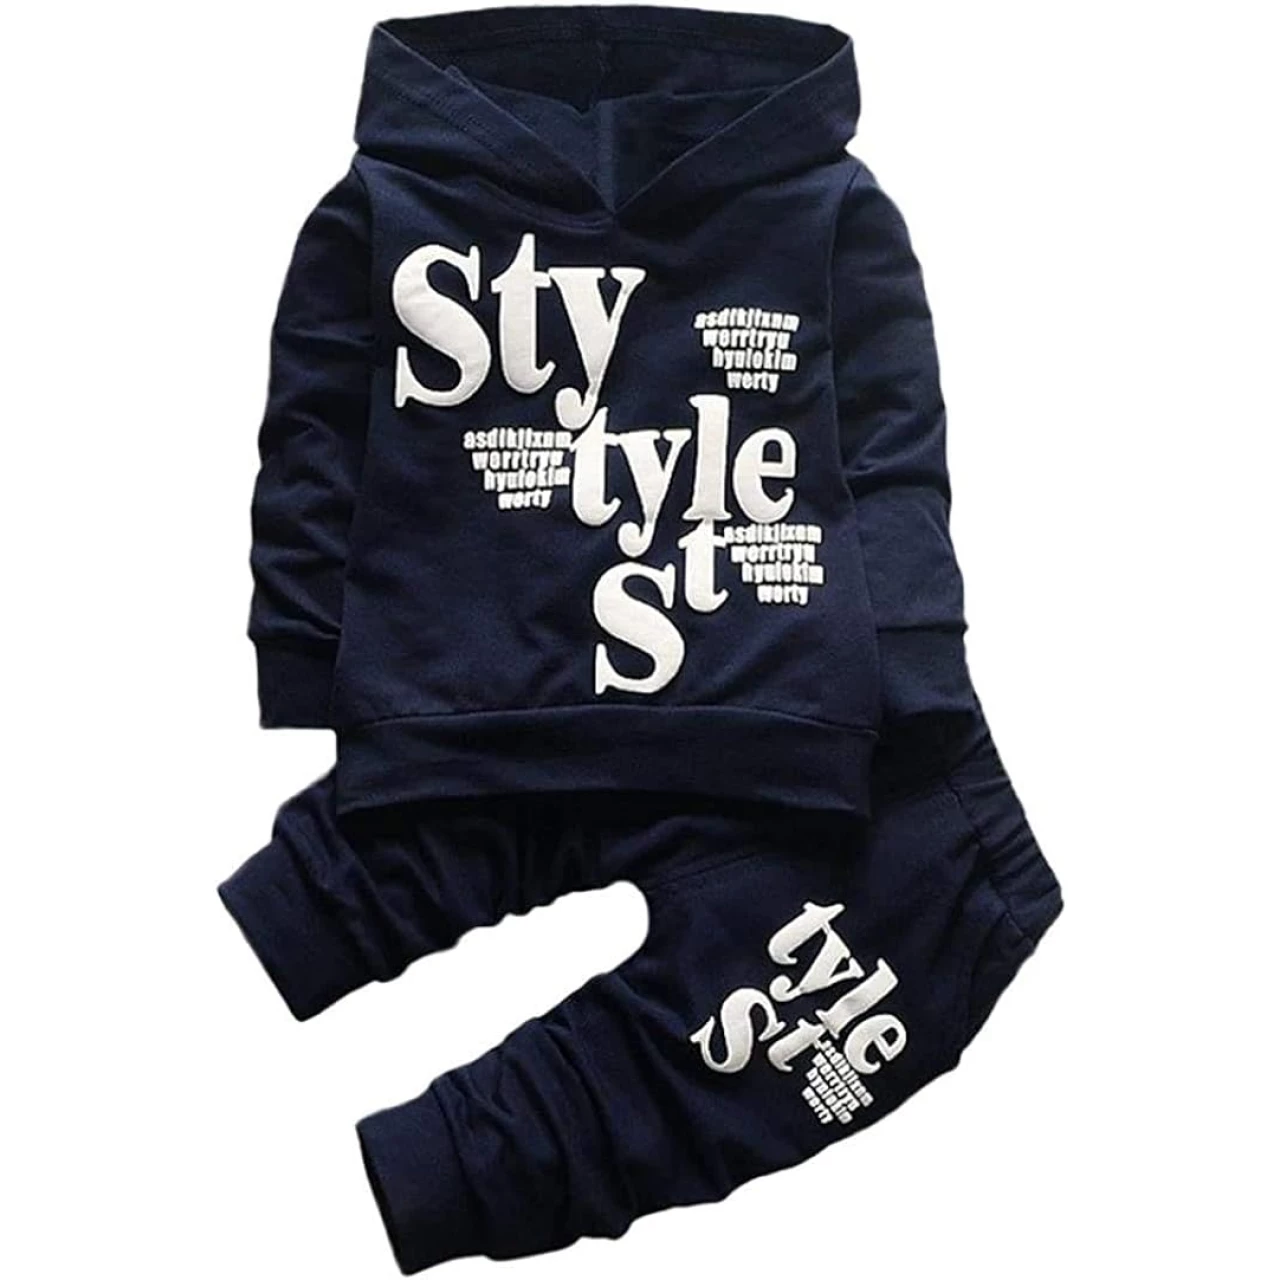 Boy Clothes Set for 1-5 Years, Toddler Baby Boys Kid Letter Print Hoodie Long Sleeve Tops Pattern Pants Fall Winter Sweatshirt